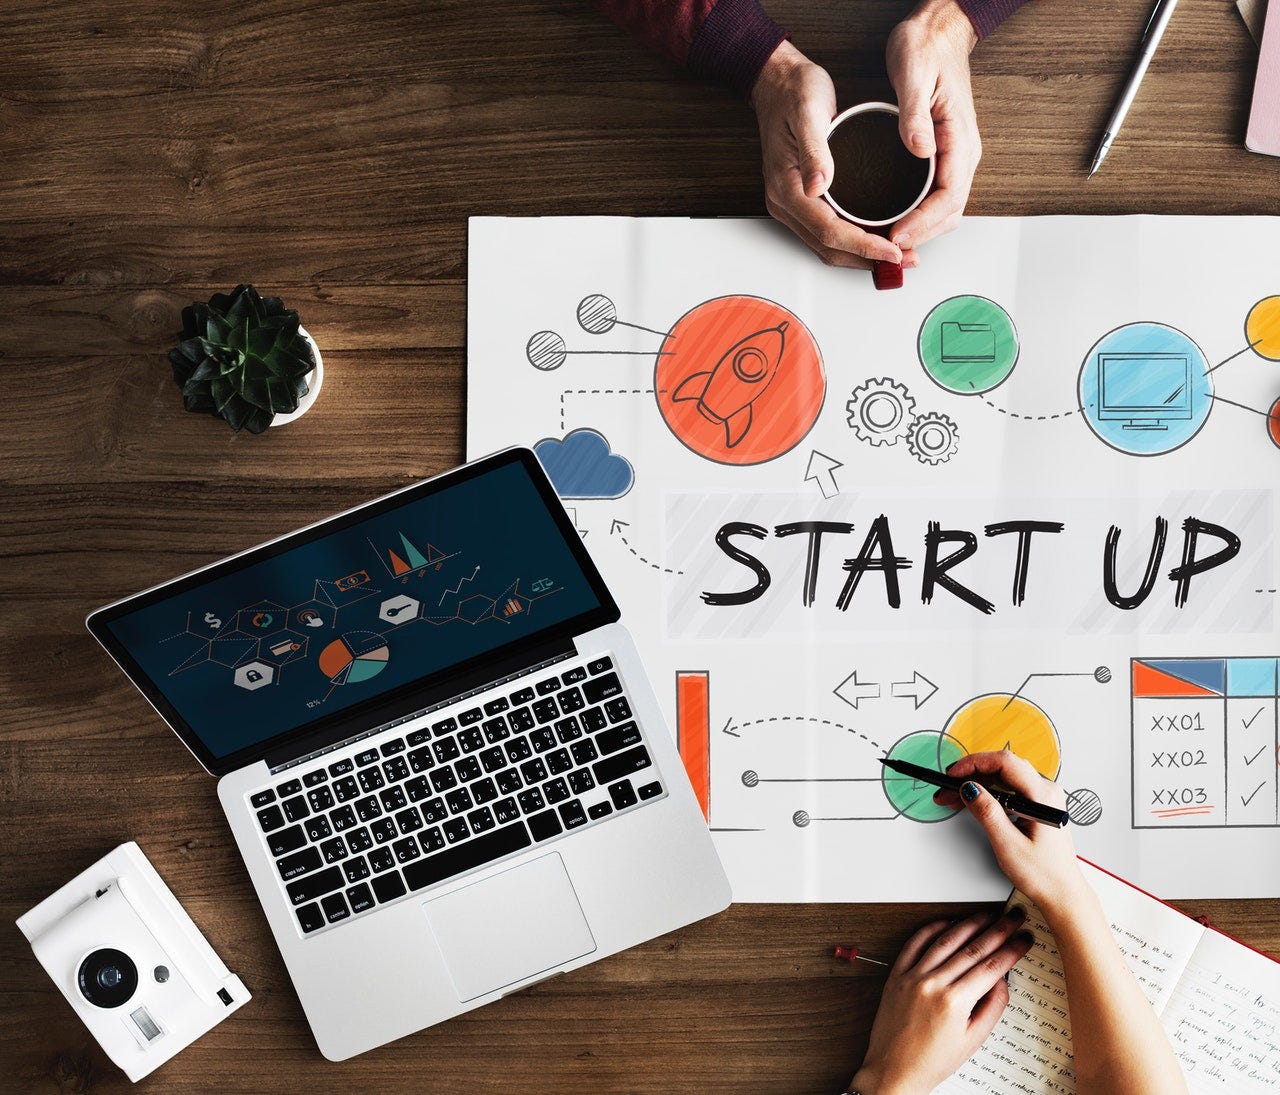 what online business should I start - overhead image of a laptop open on the table with a large sheet of paper that says "start up" showing all of the planning that goes into starting a business